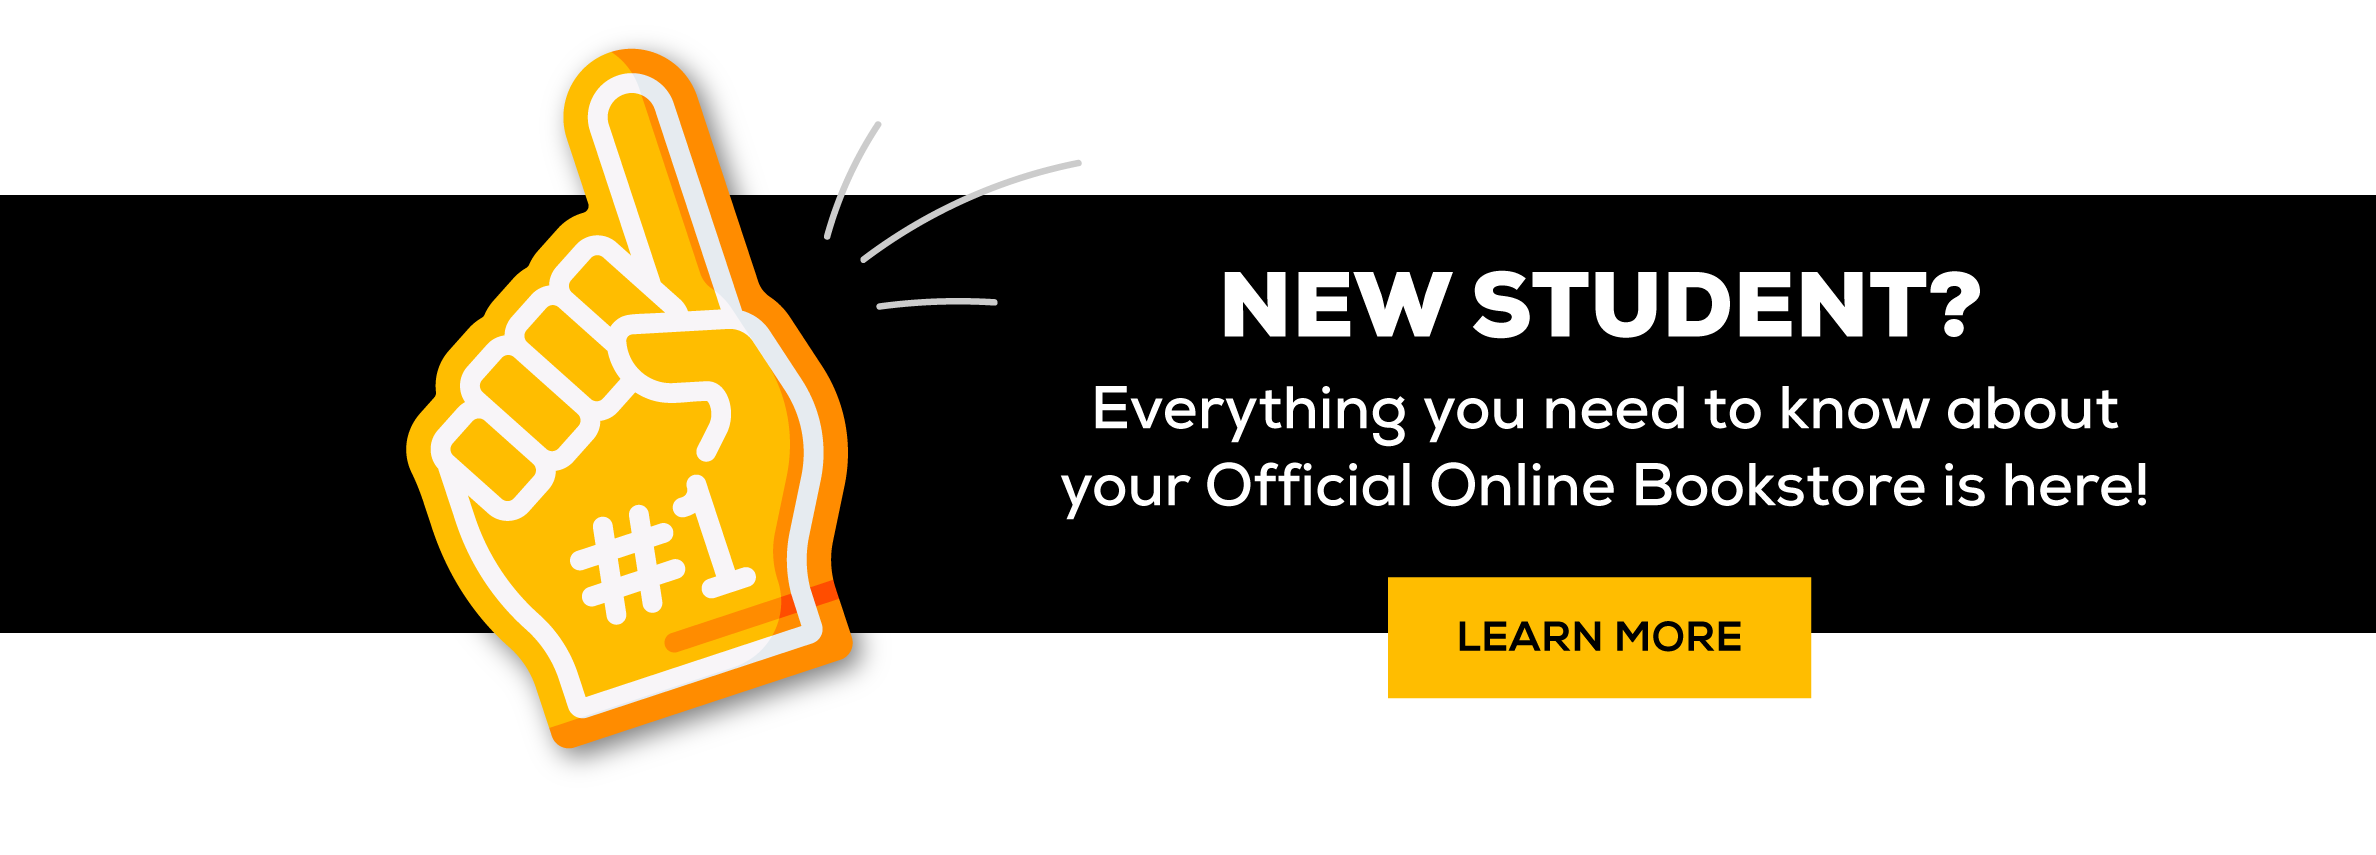 New Student Everything you need to know about your official online bookstore is here - learn more (new tab)